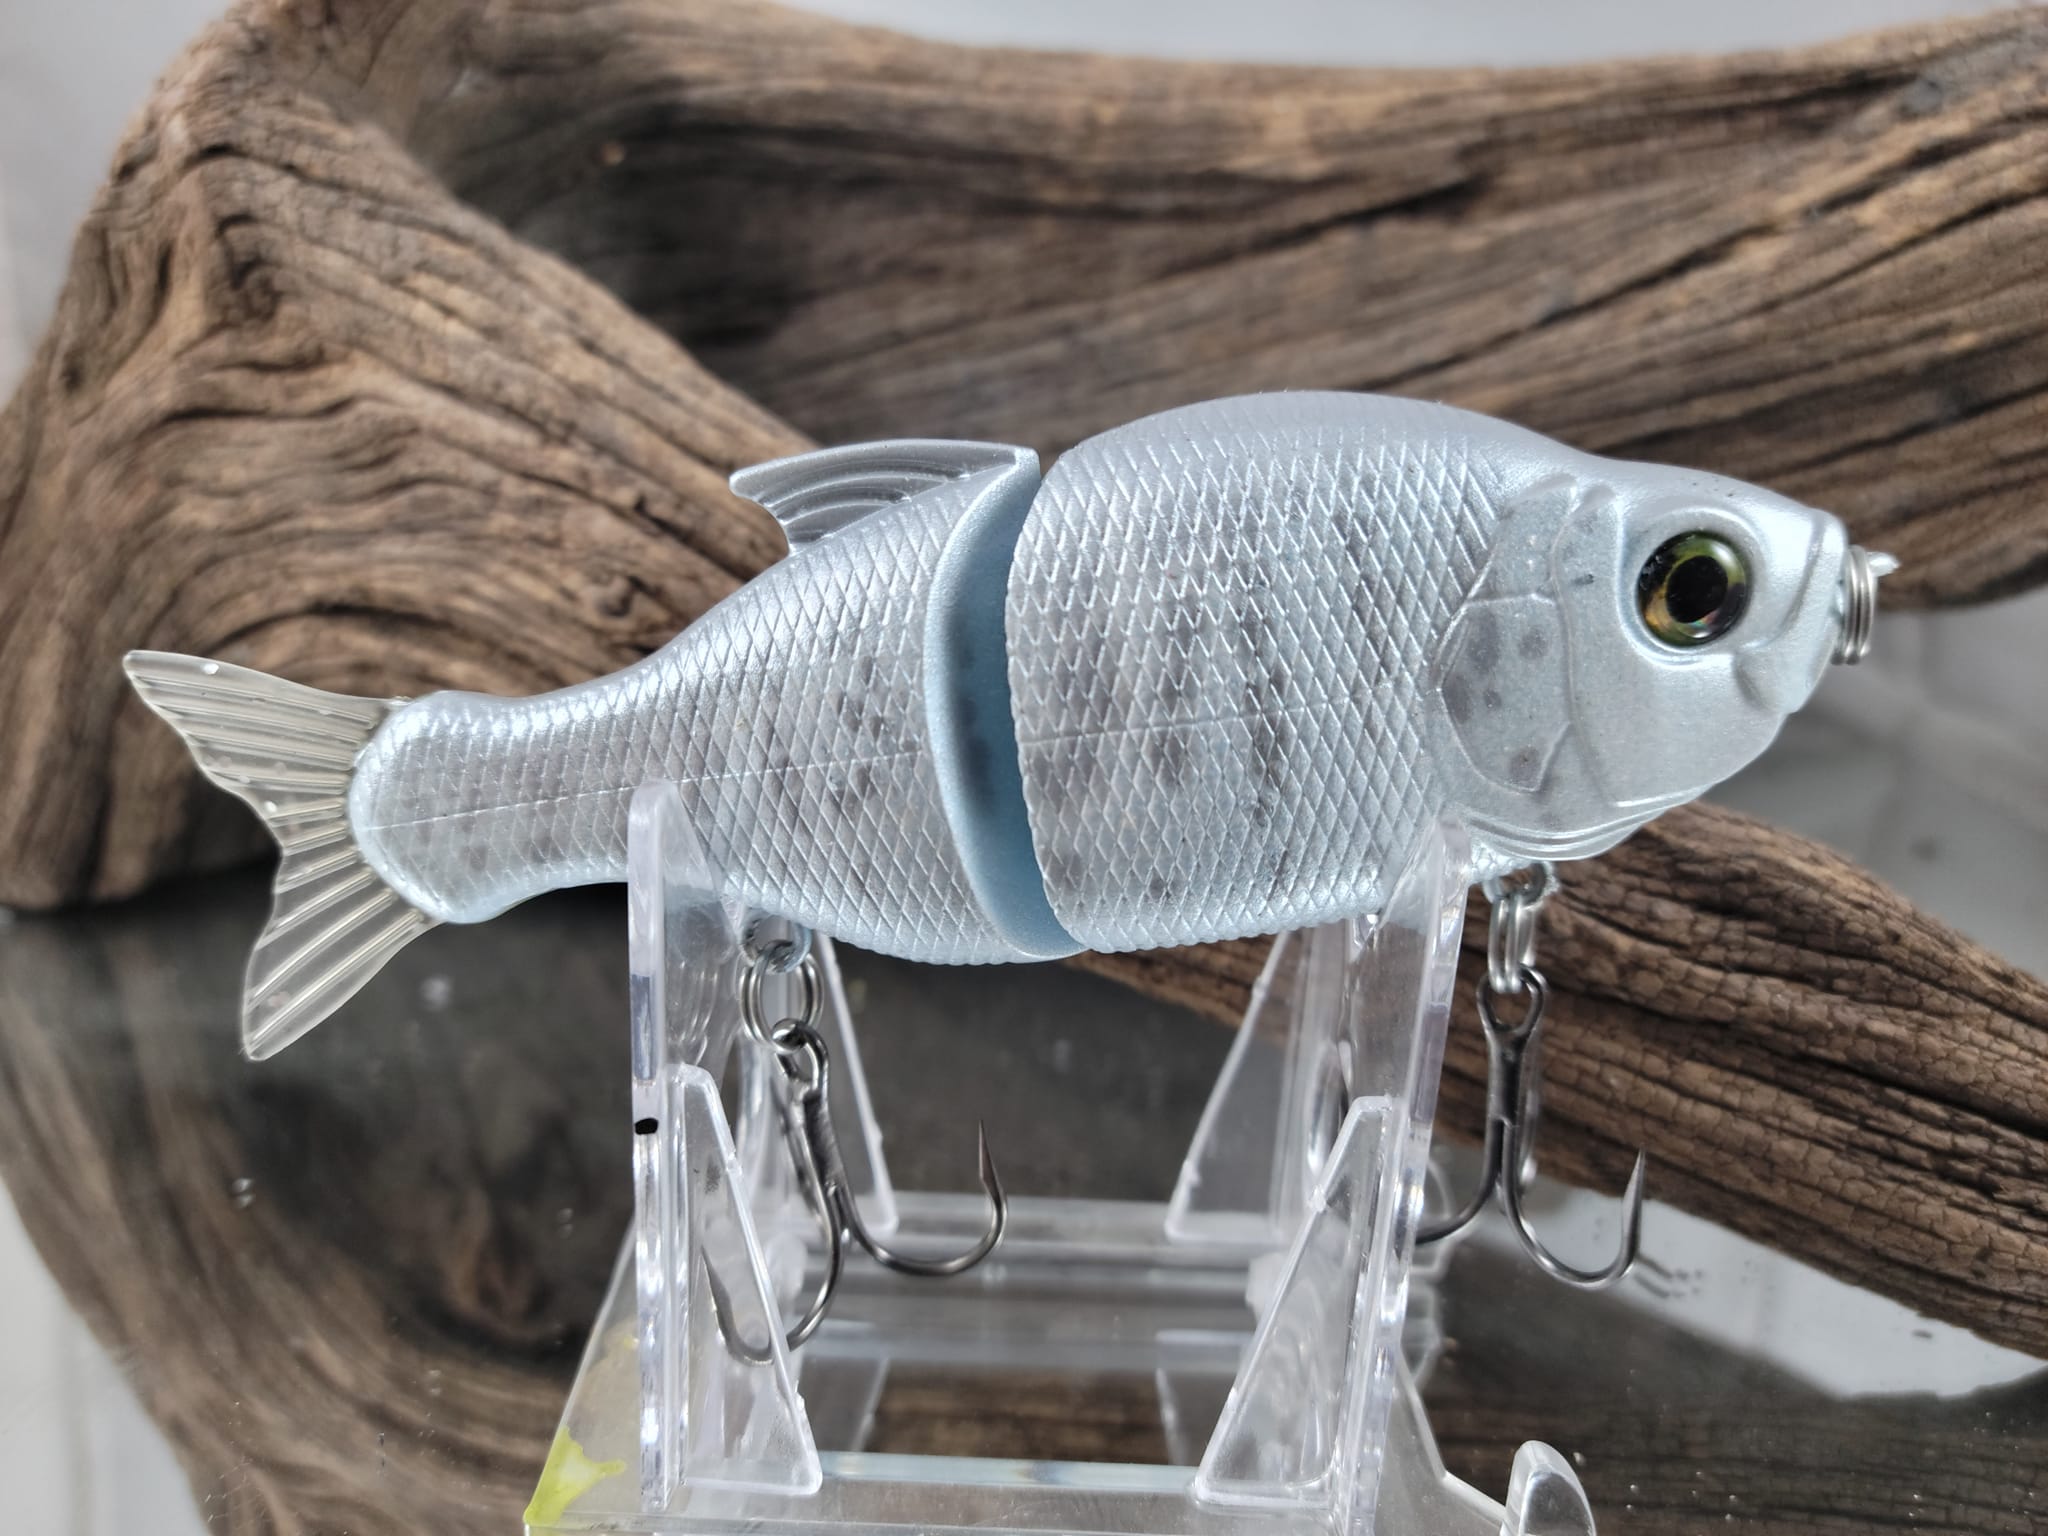 S Song 115 style Glidebait - White Crappie